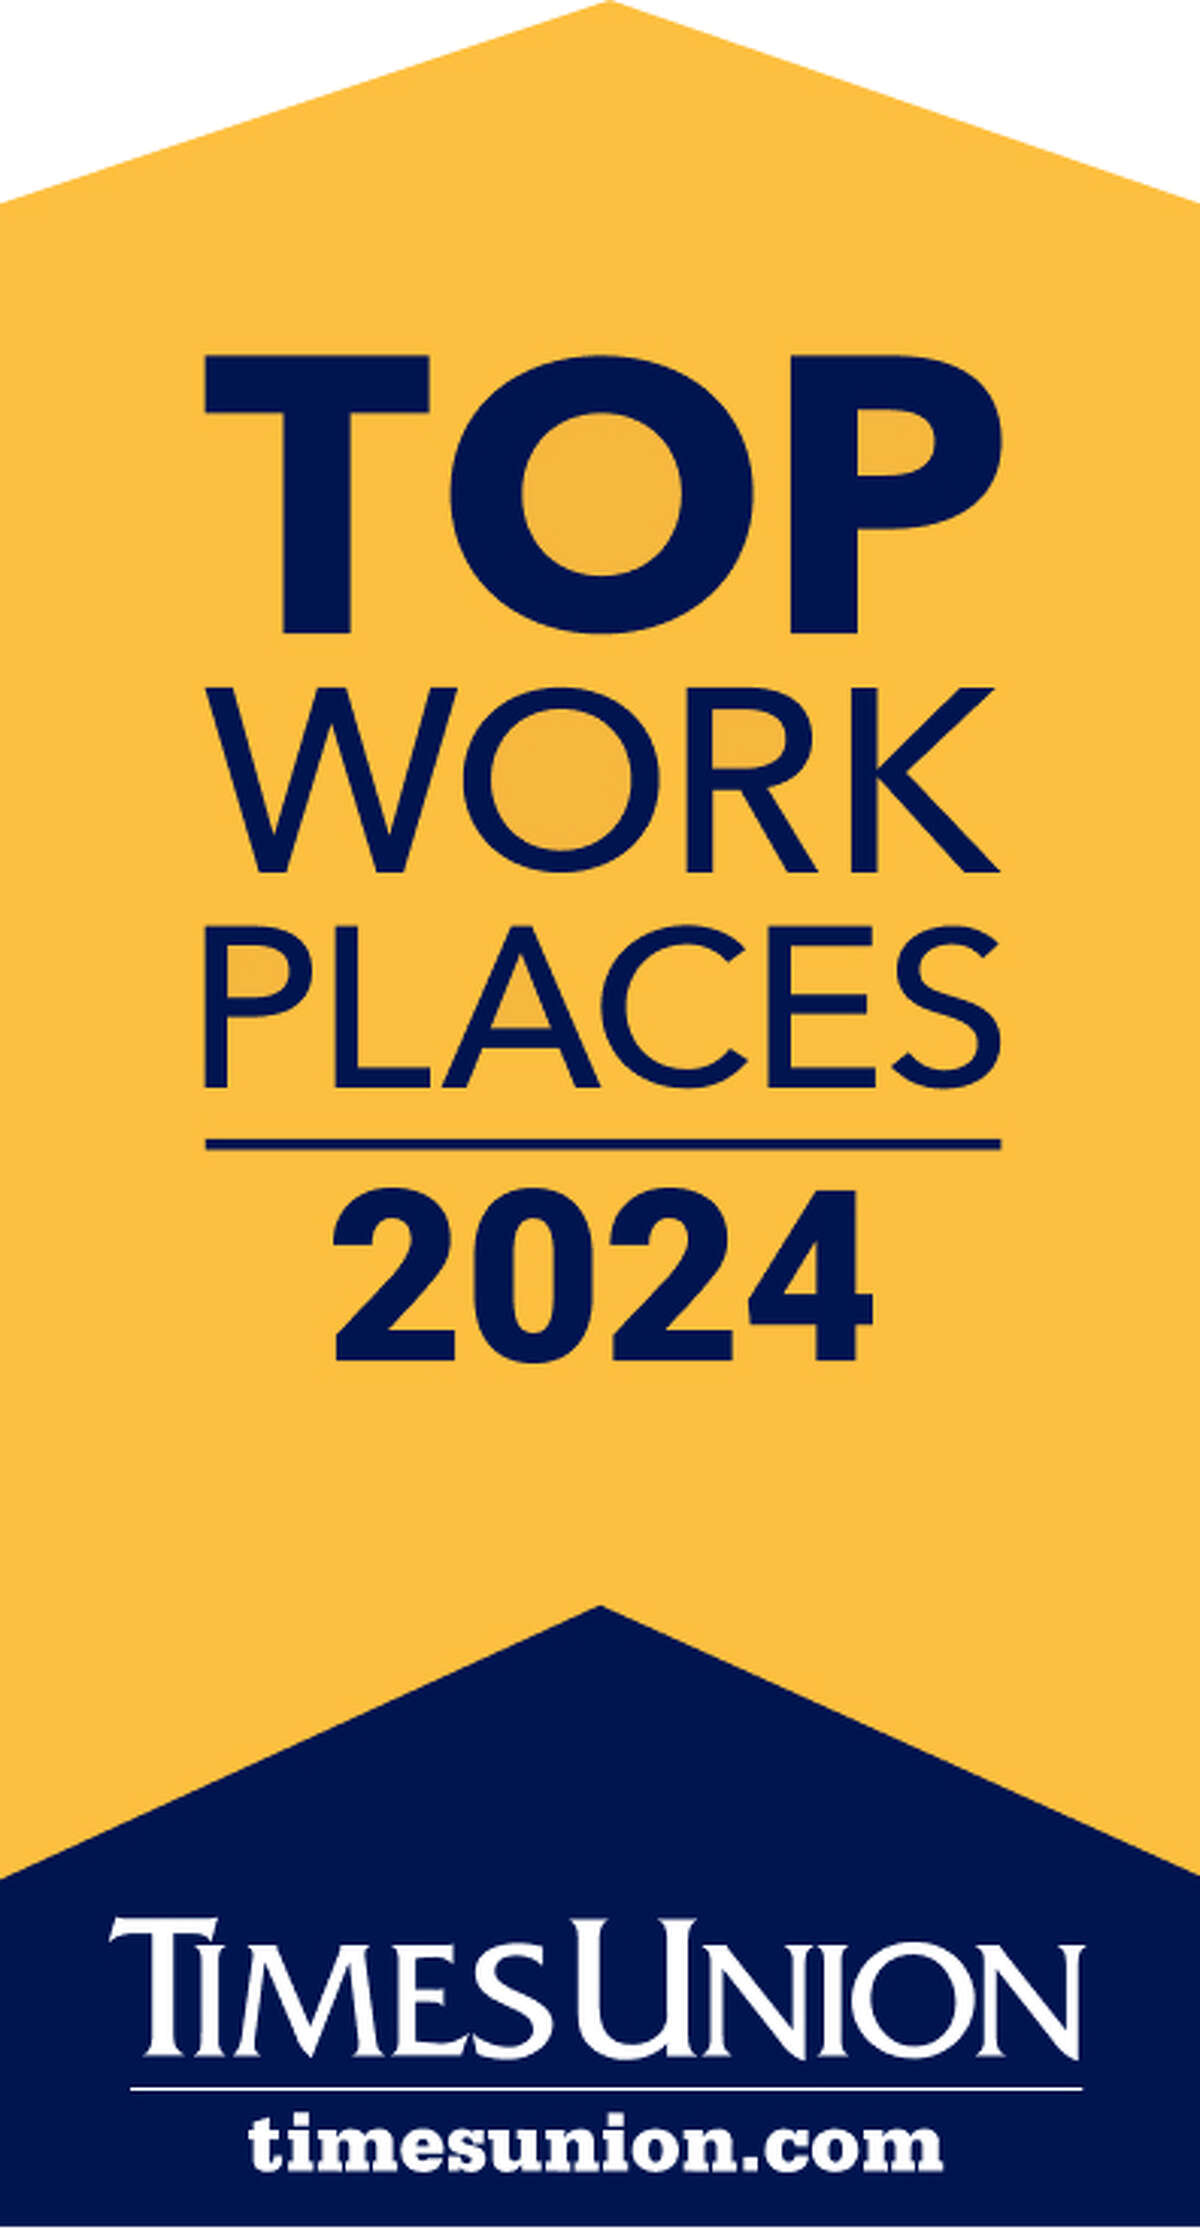 There's still time to nominate employers for Top Workplaces